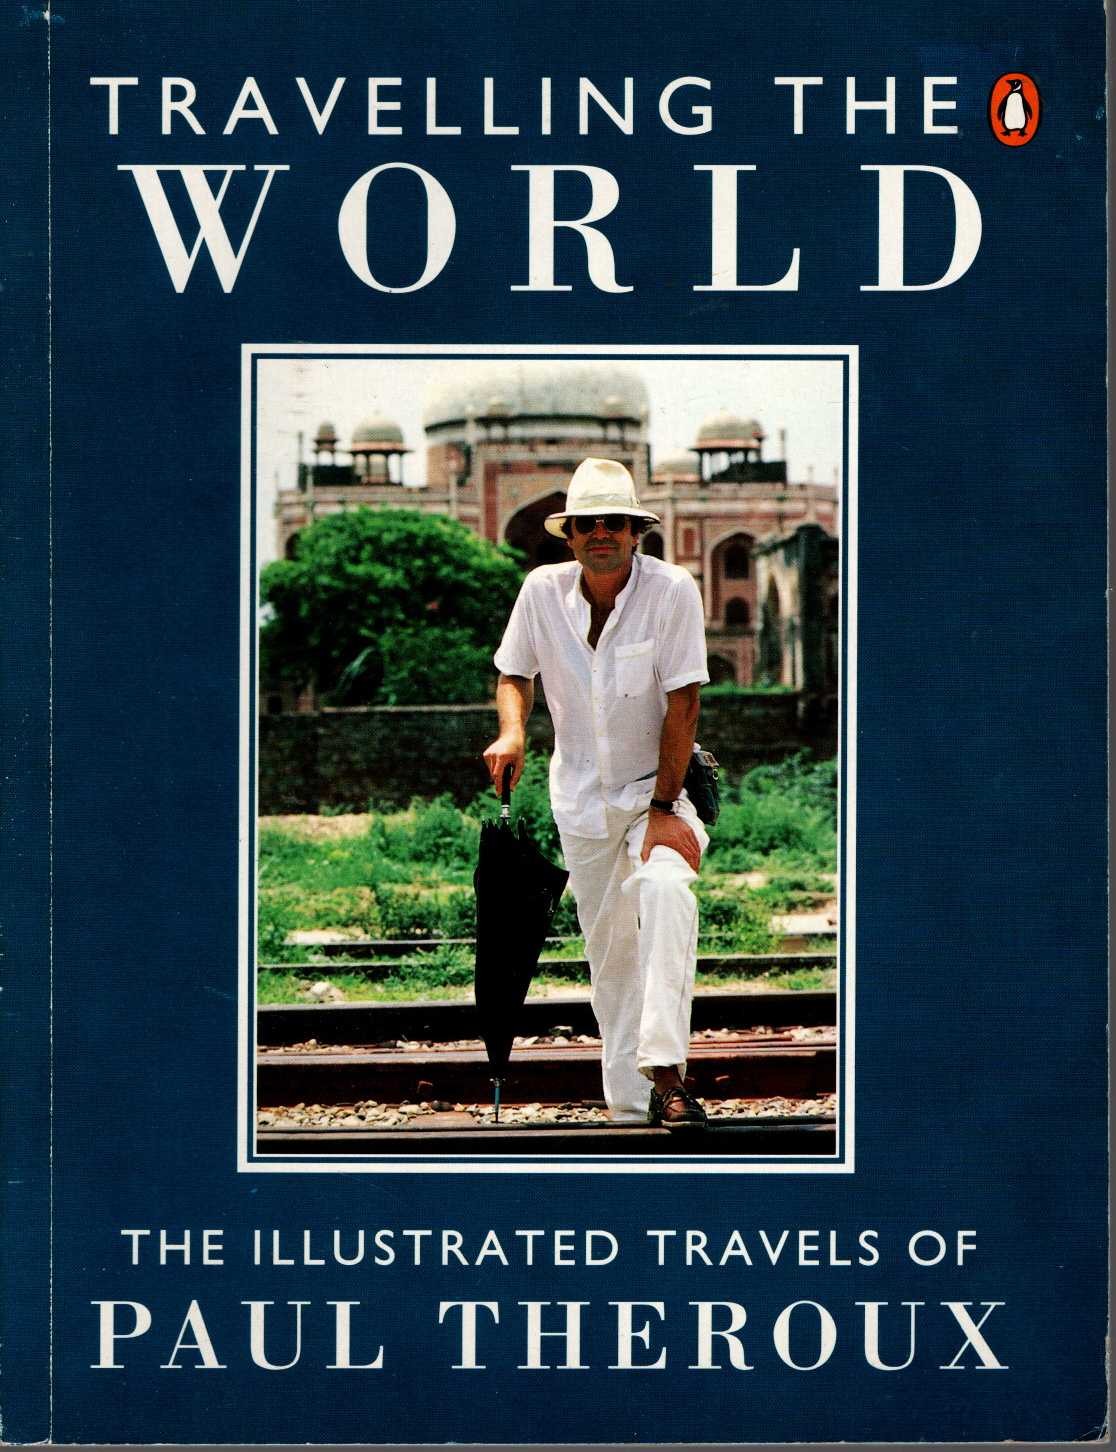 Paul Theroux  TRAVELLING THE WORLD: THE ILLUSTRATED TRAVELS OF PAUL THEROUX (Travel) front book cover image